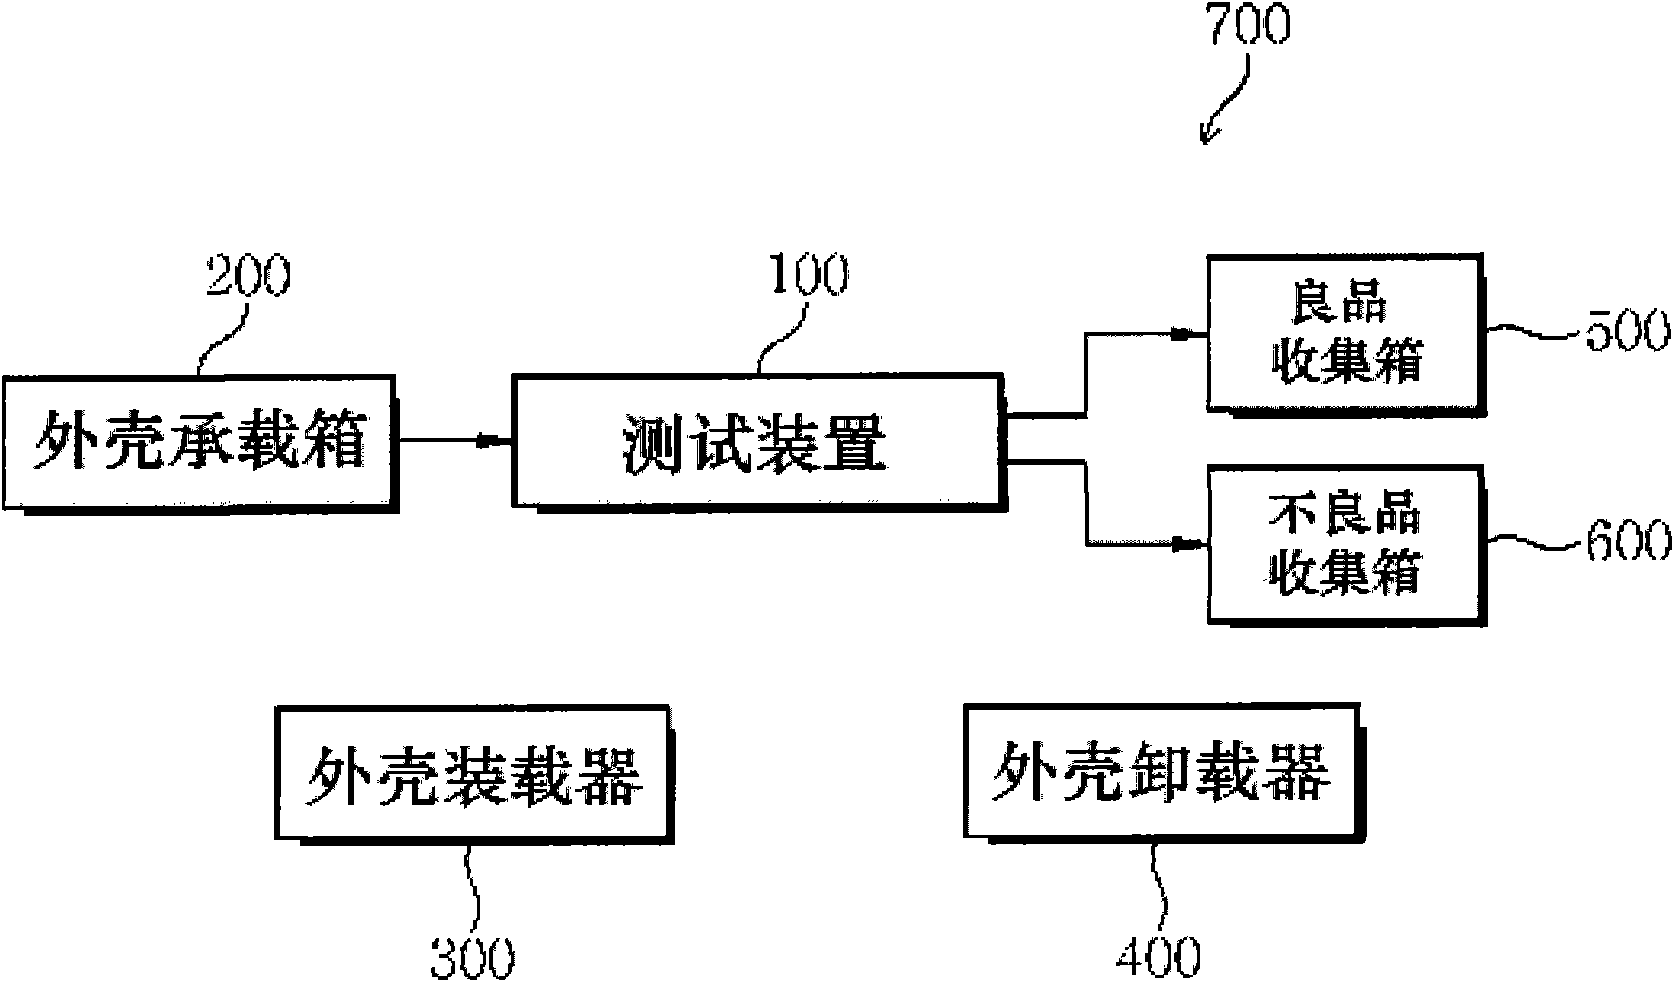 Test device of non-conducting plating coating shell and test system of test device